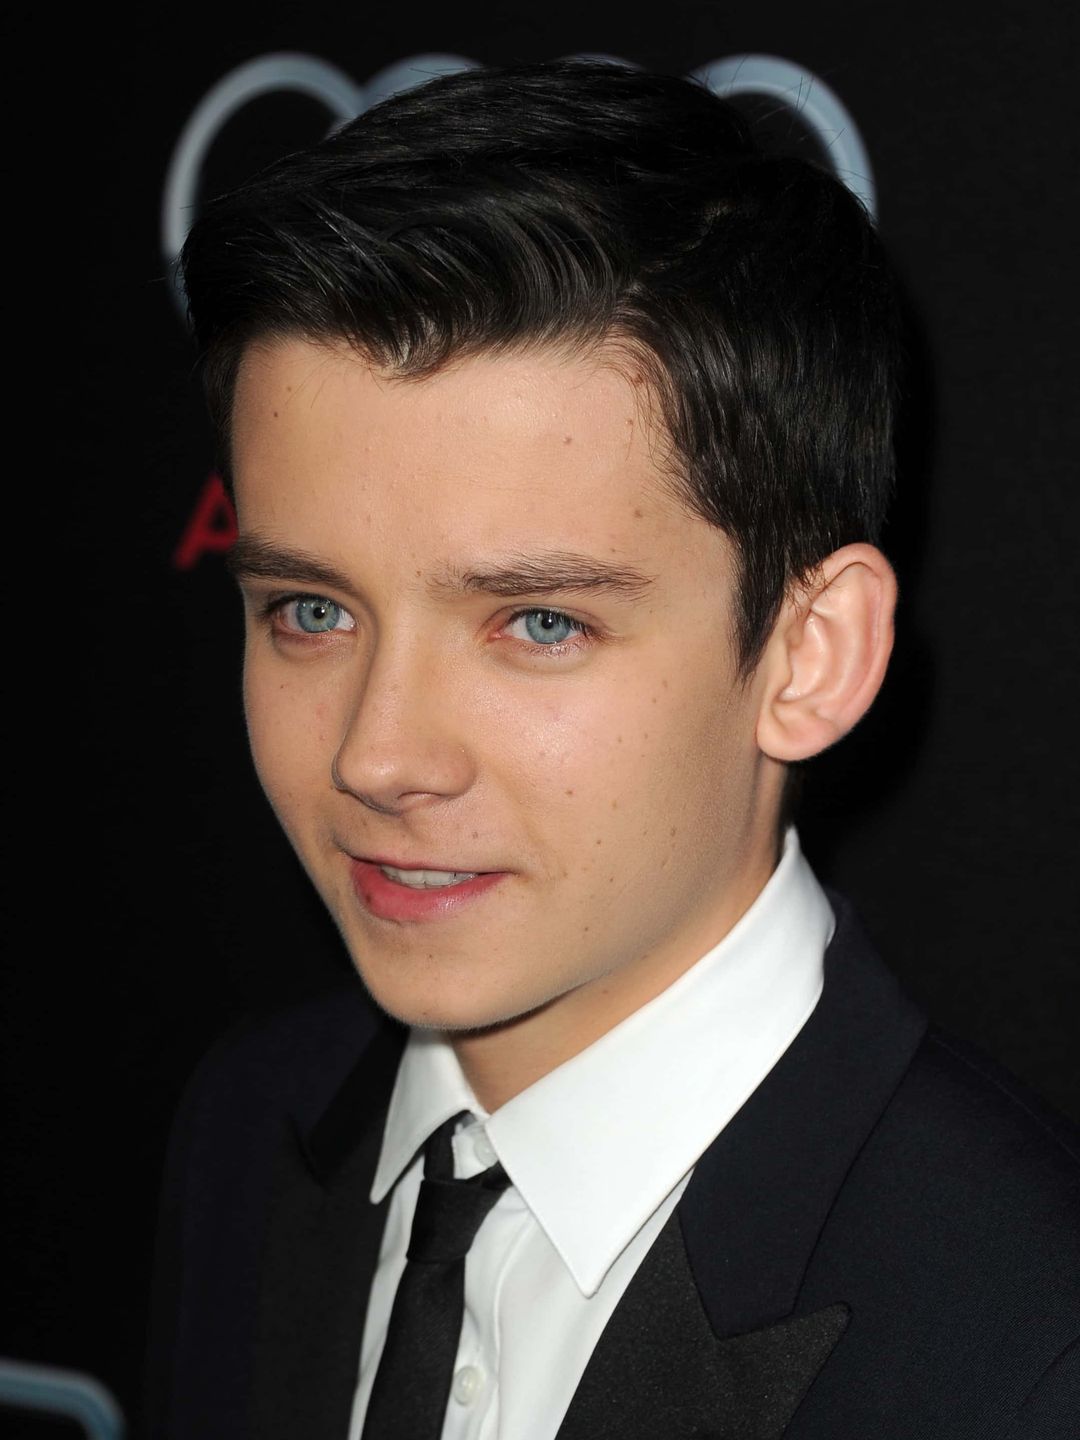 Asa Butterfield early life